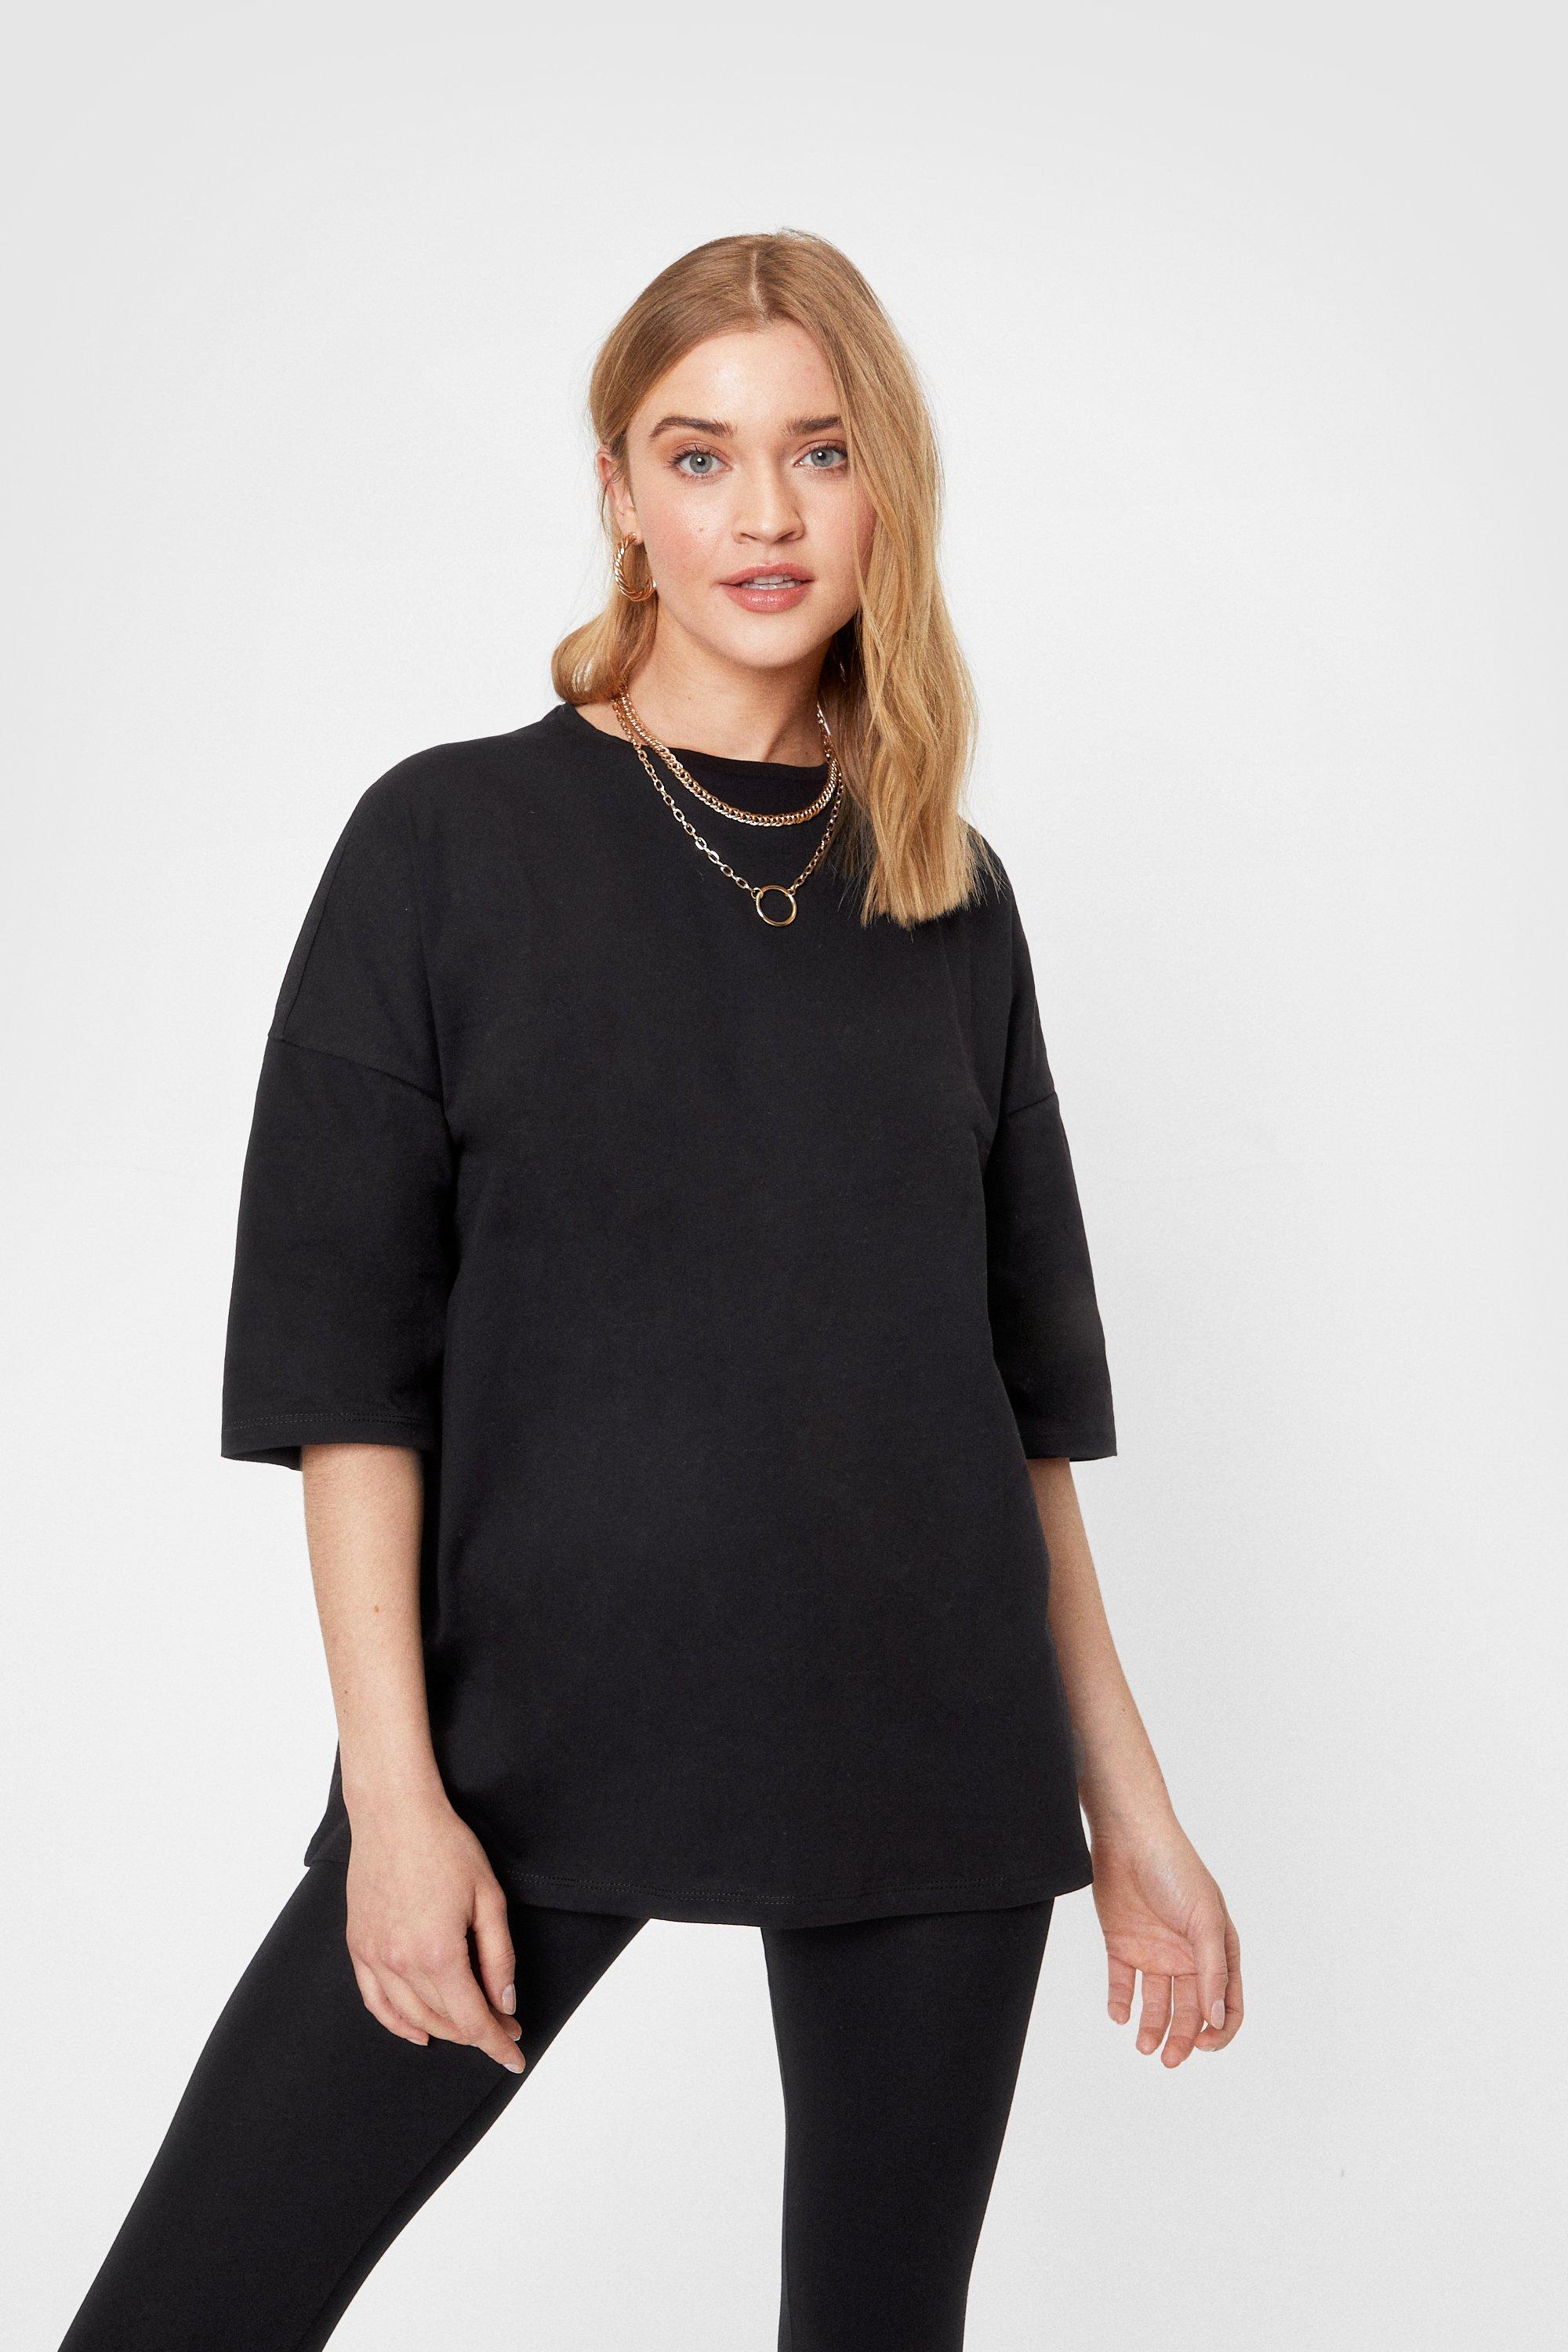 Comfy oversized T-shirt and leggings